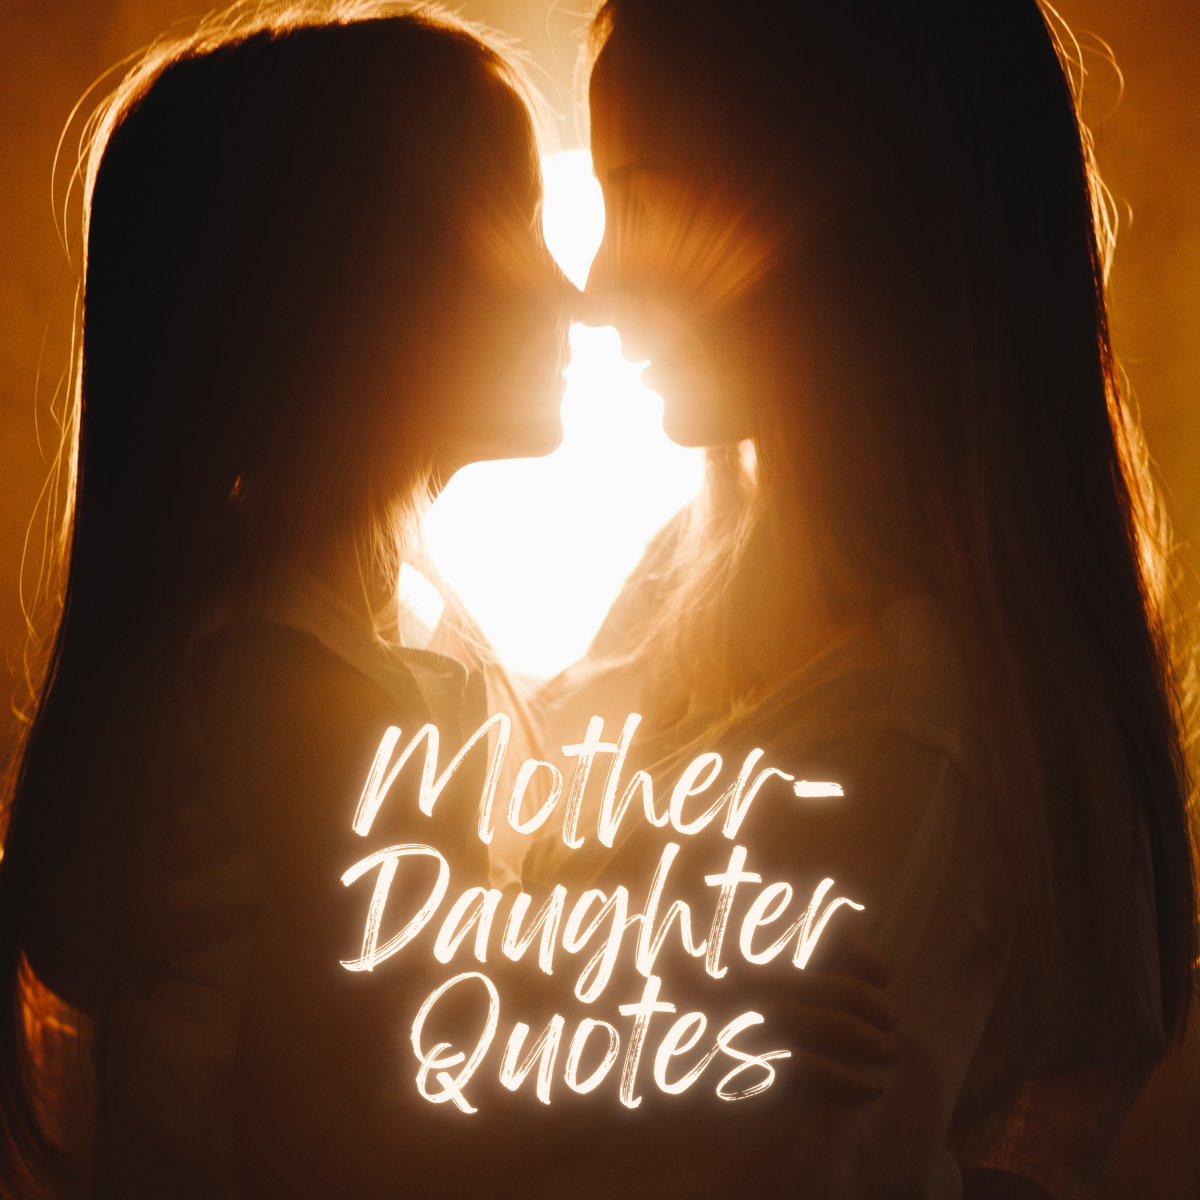 Quotes About Mother-Daughter Relationships